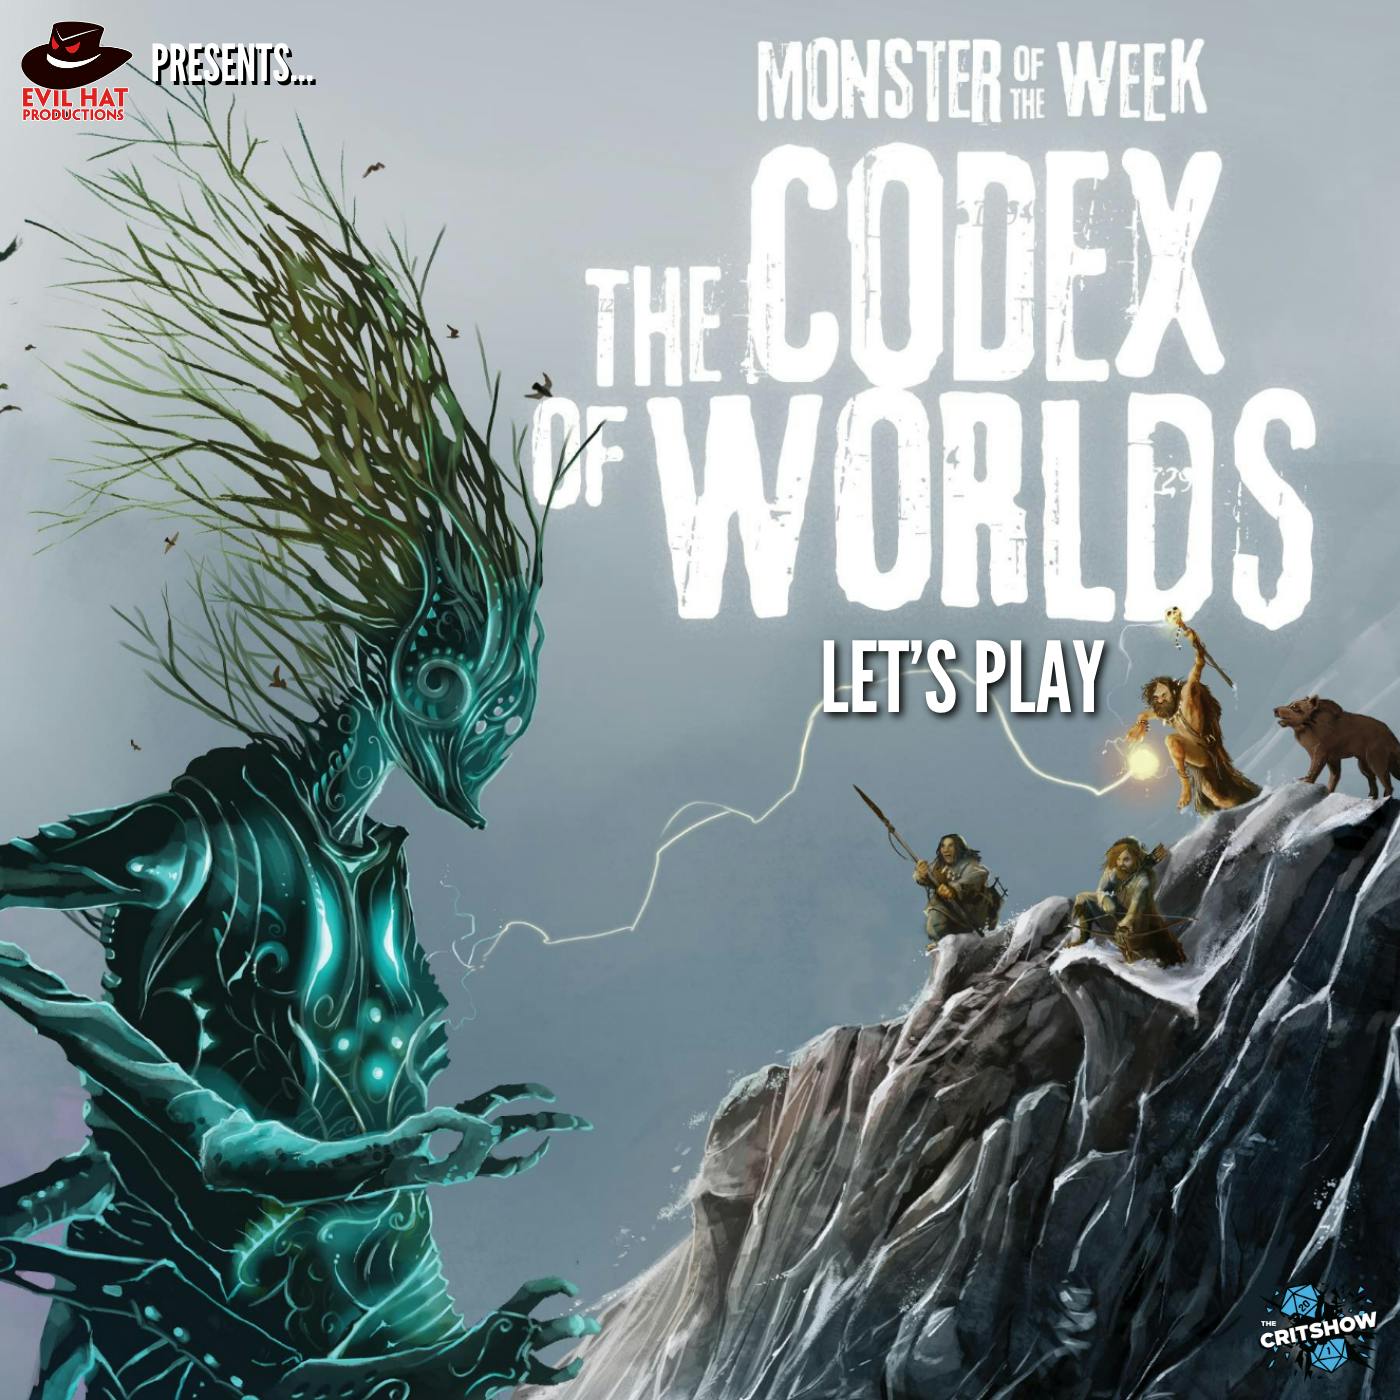 The Critshow: The Codex of Worlds (Pt 5)